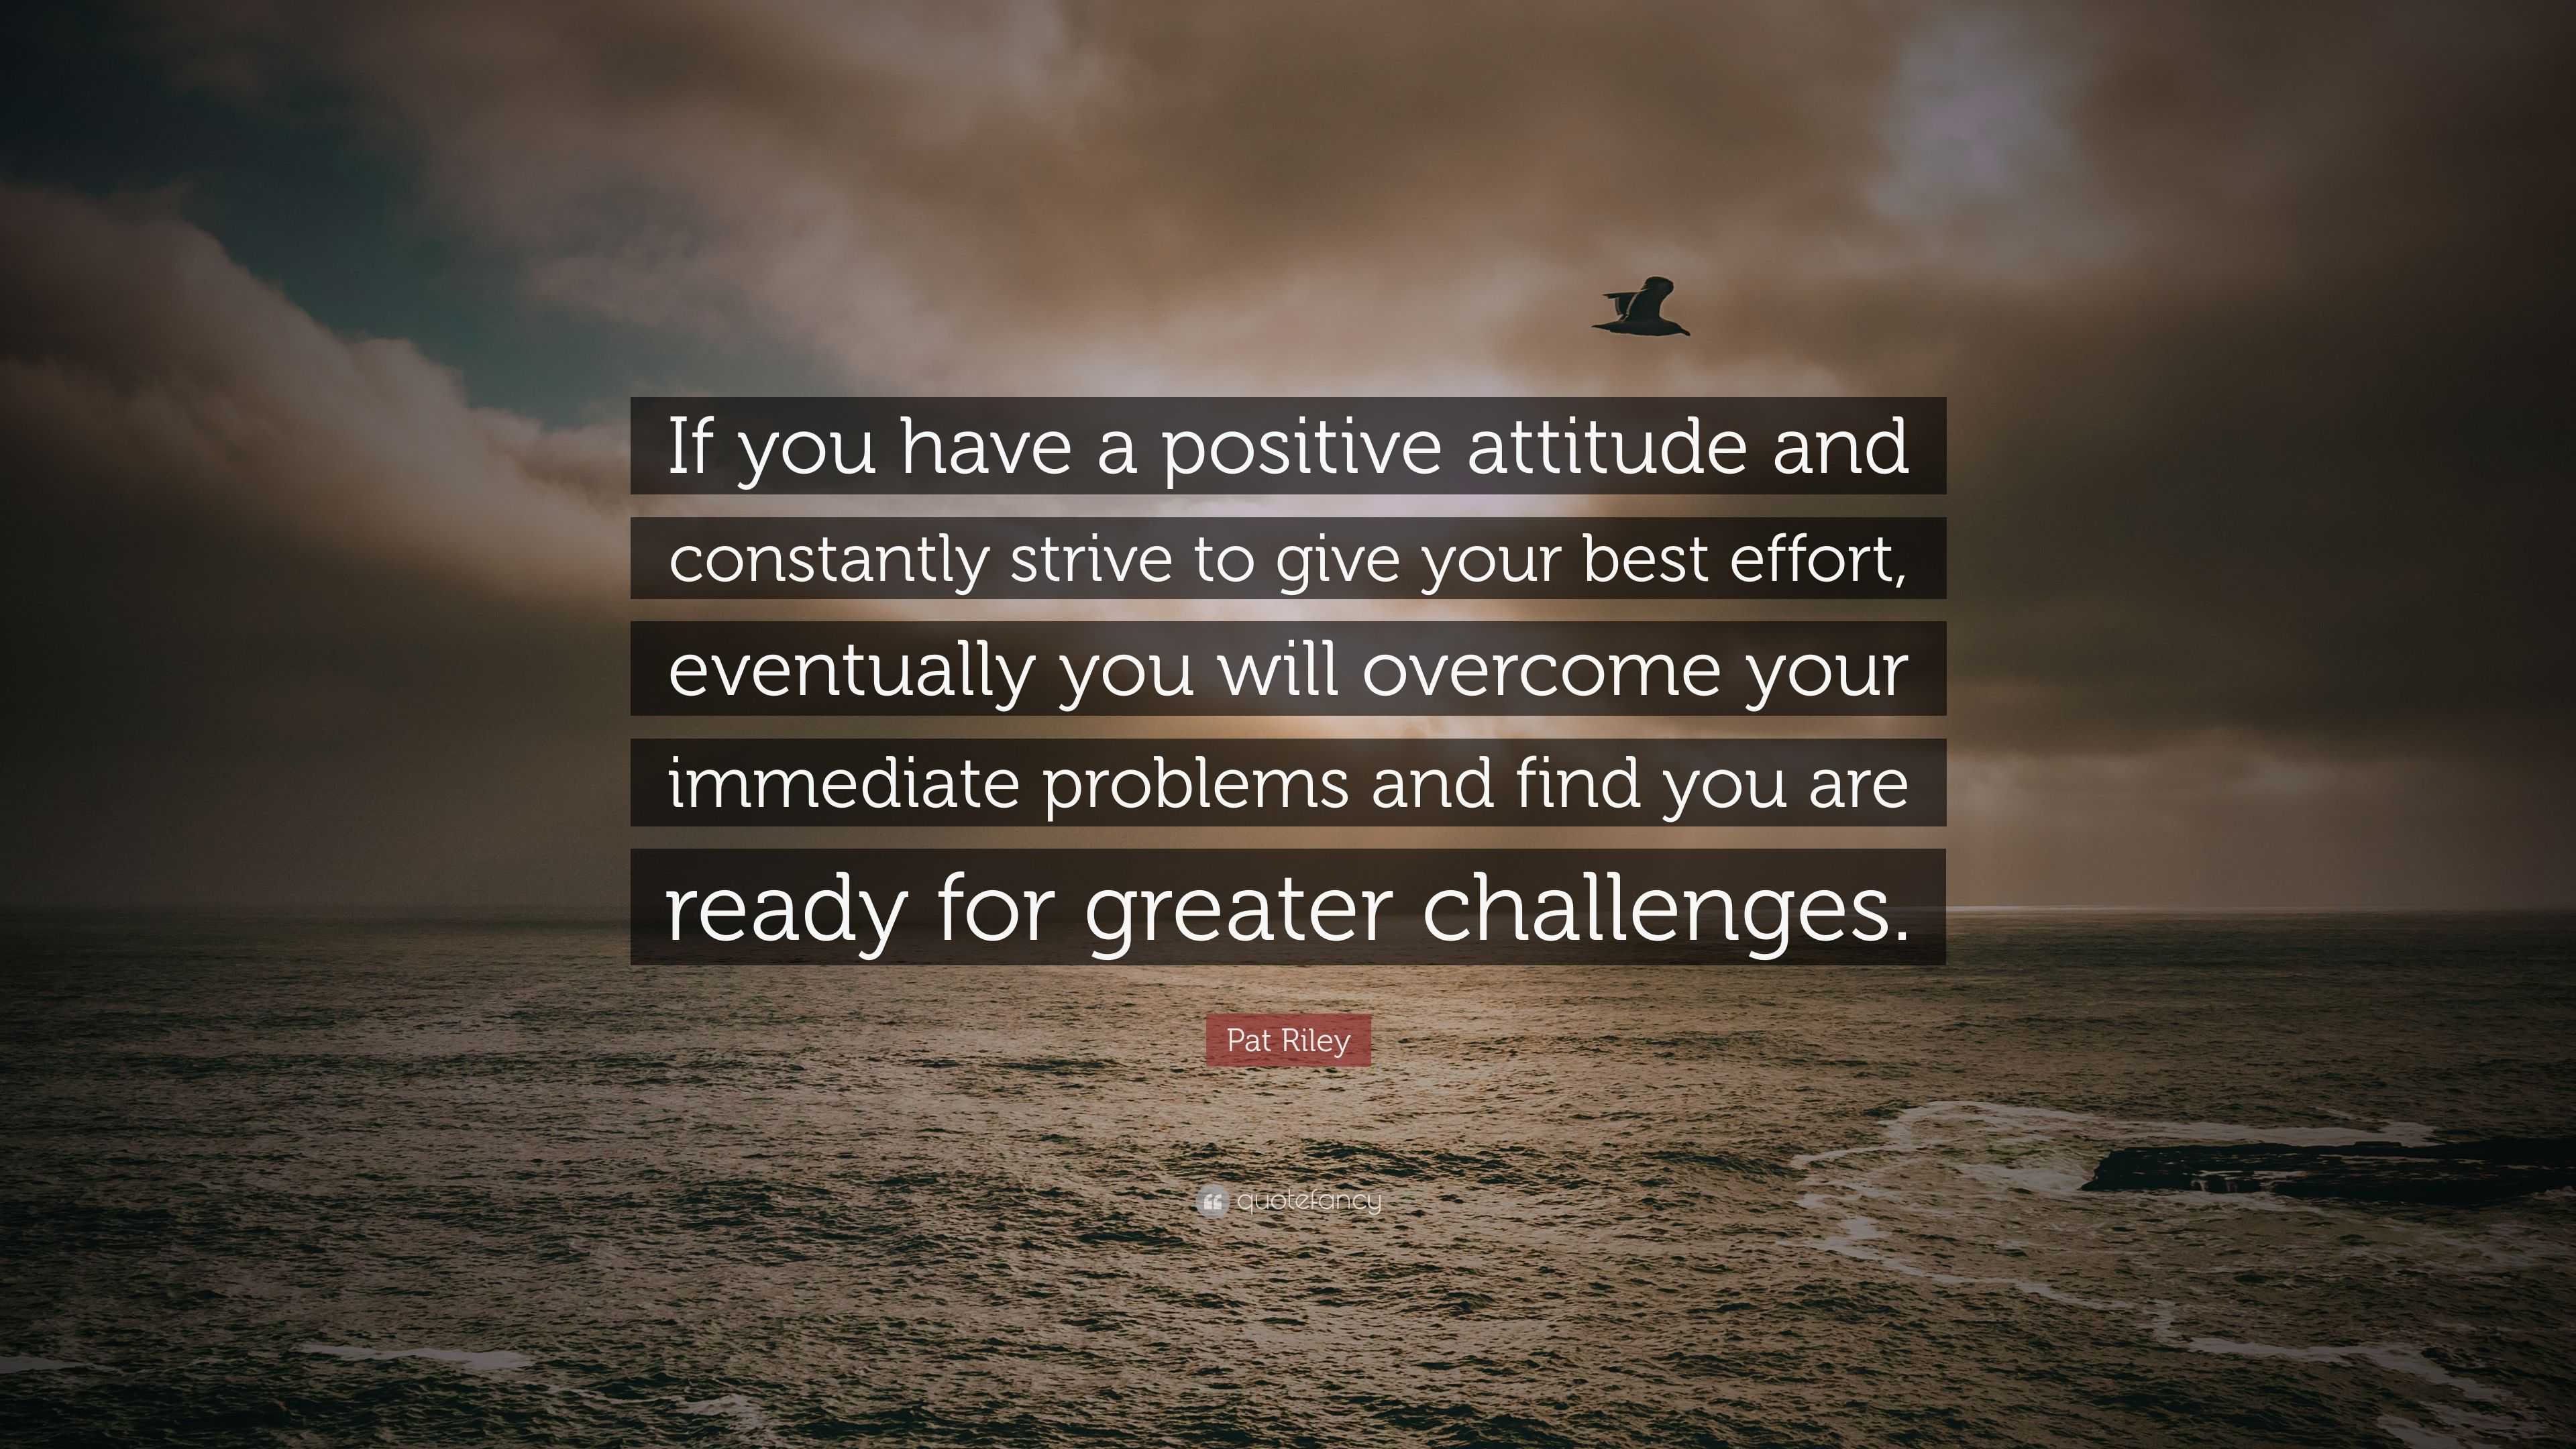 Pat Riley Quote “If you have a positive attitude and